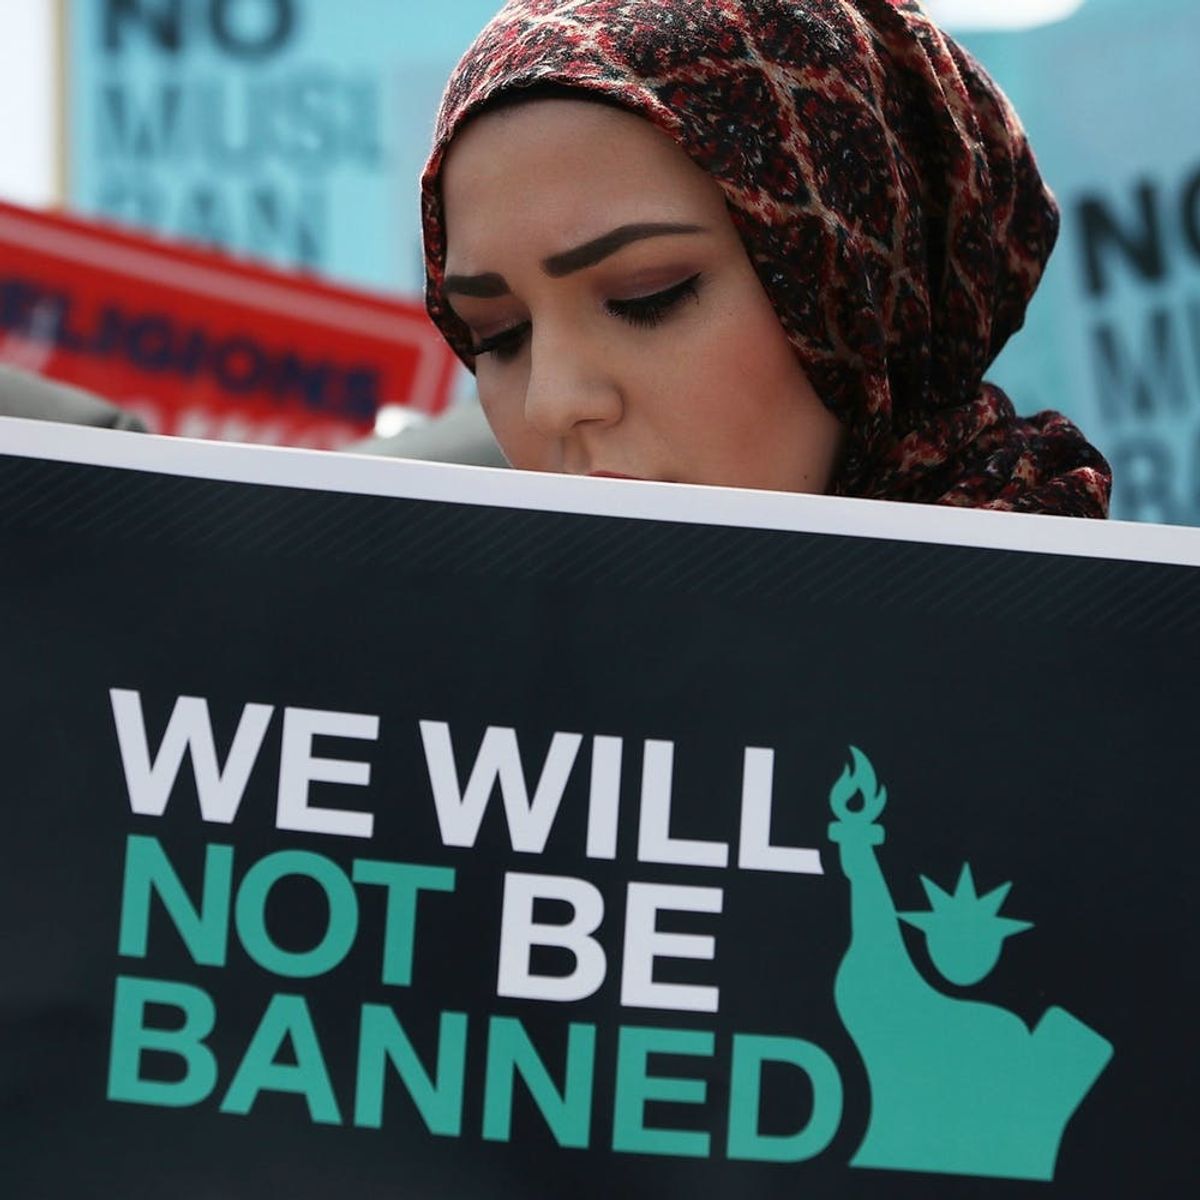 The Supreme Court Has Ruled in Favor of the President’s Muslim Travel Ban